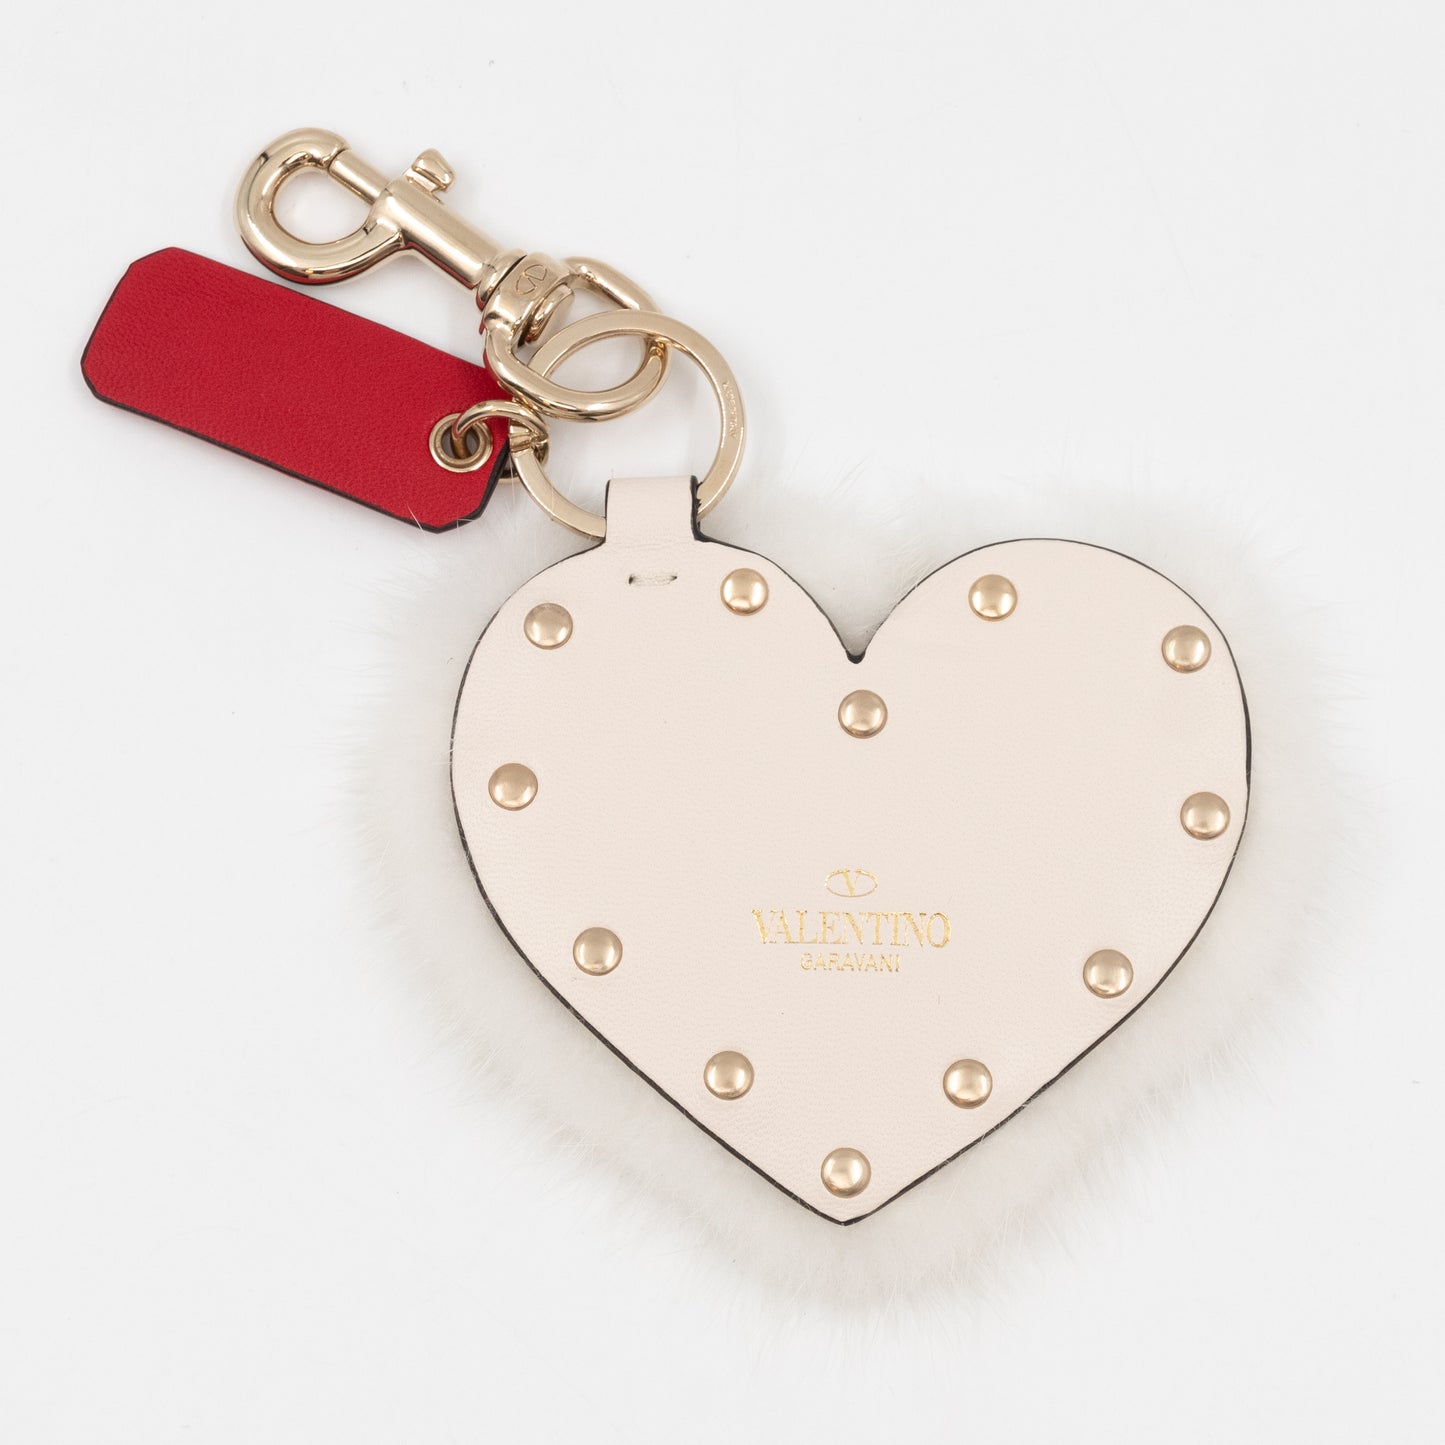 Rockstud Heart Bag Charm with Tags Leather and Fur White